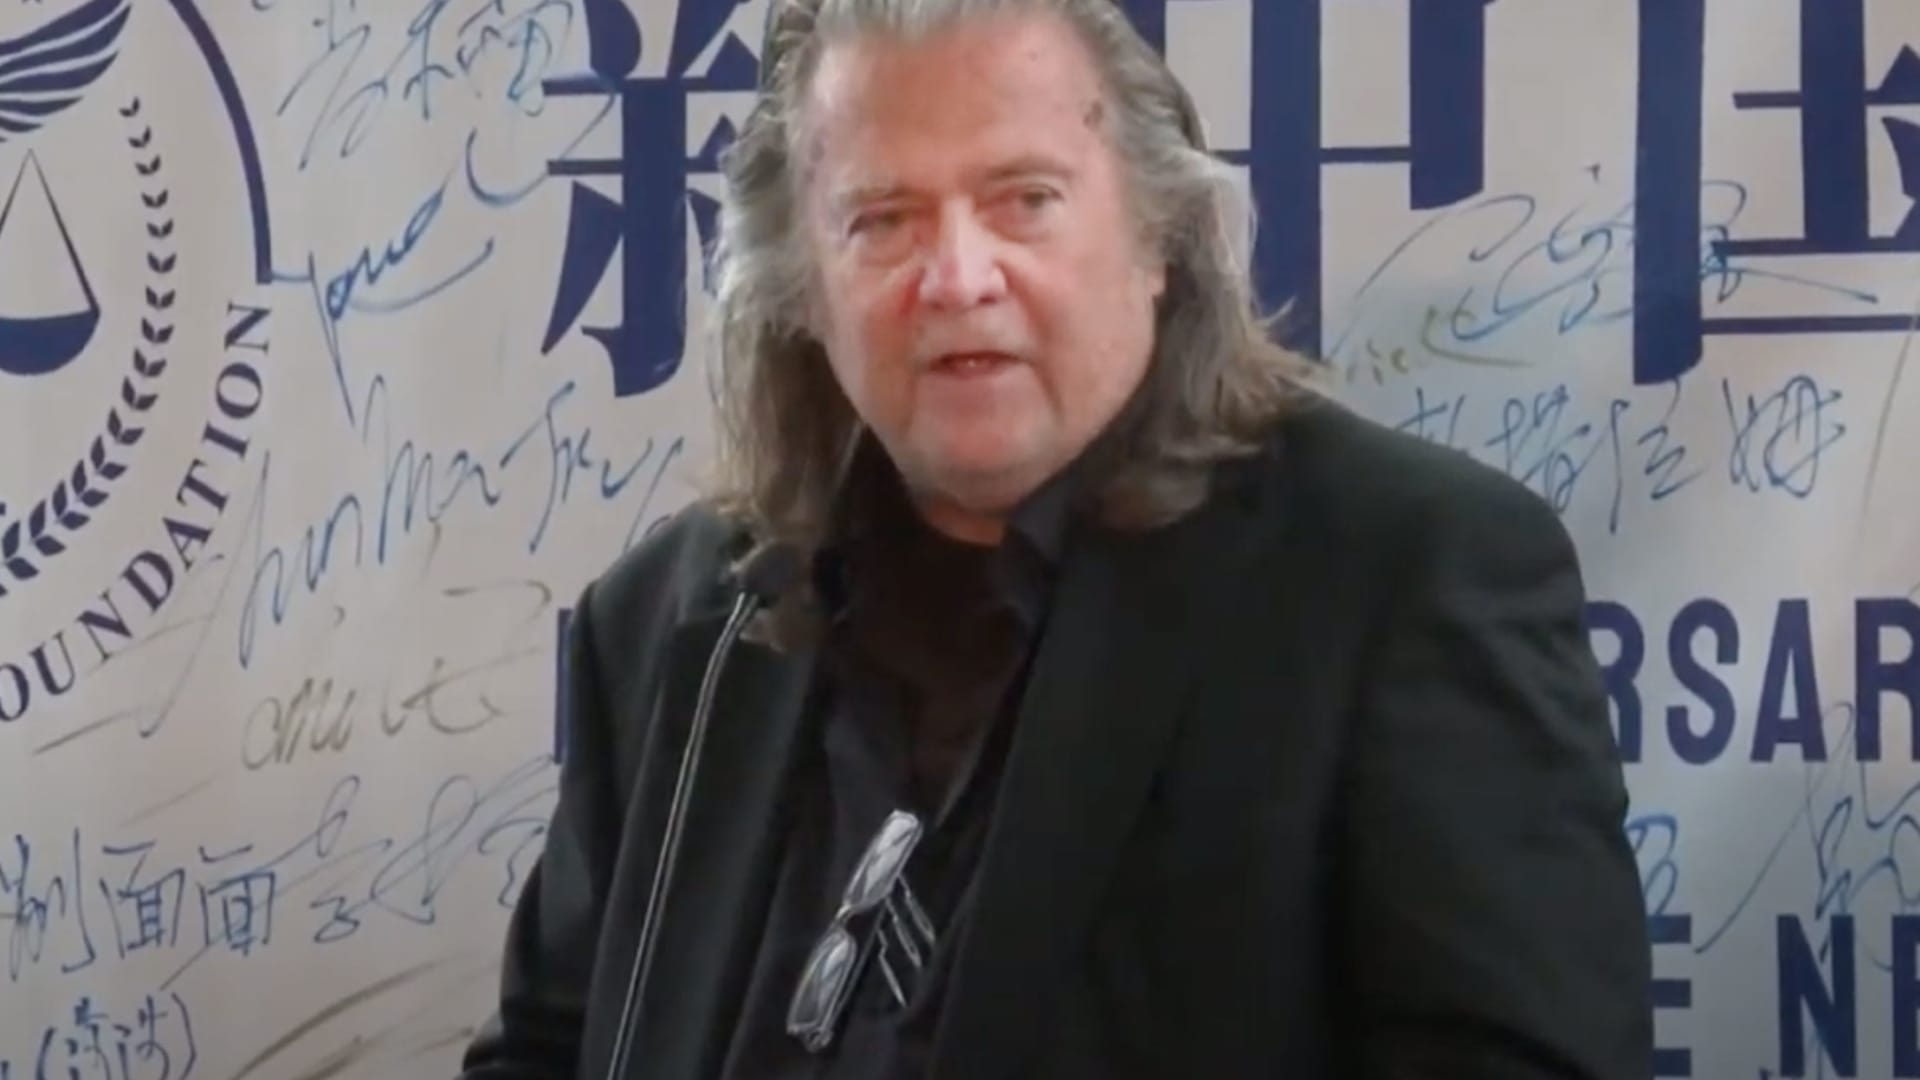 Steve Bannon speaks at one year anniversary celebration of the New Federal State of China.